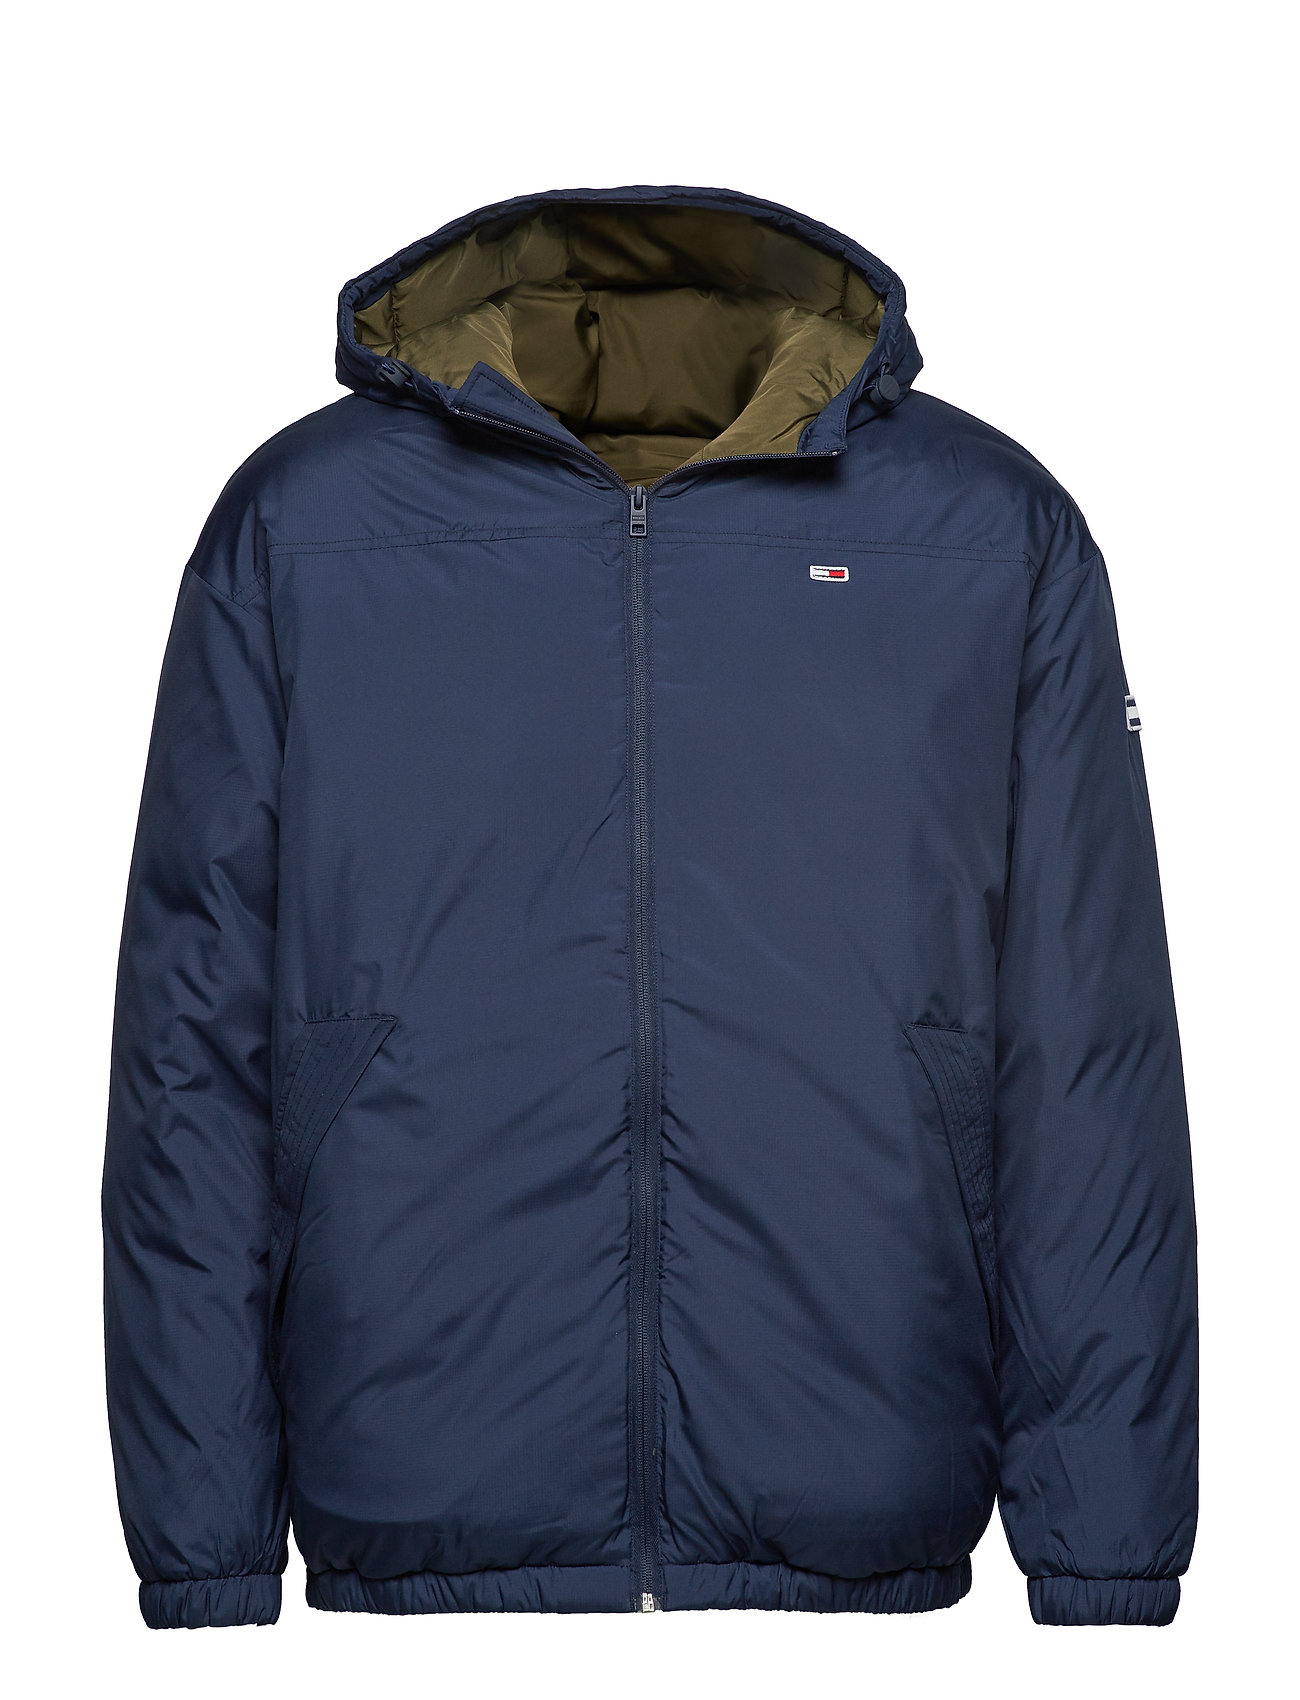 tommy essential hooded